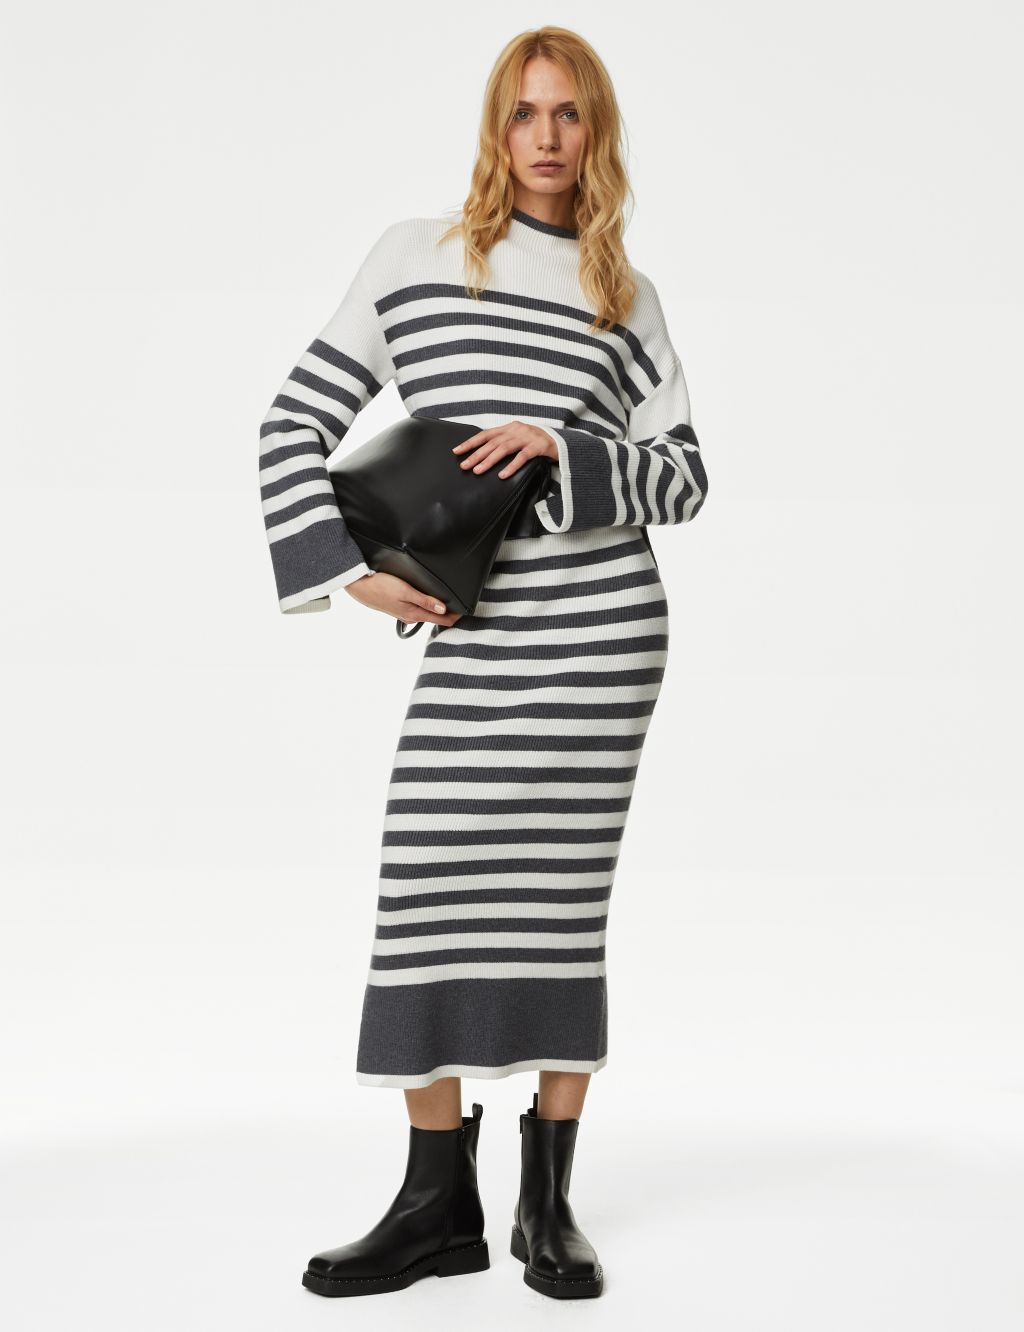 Striped Knitted Midi Skirt image 1